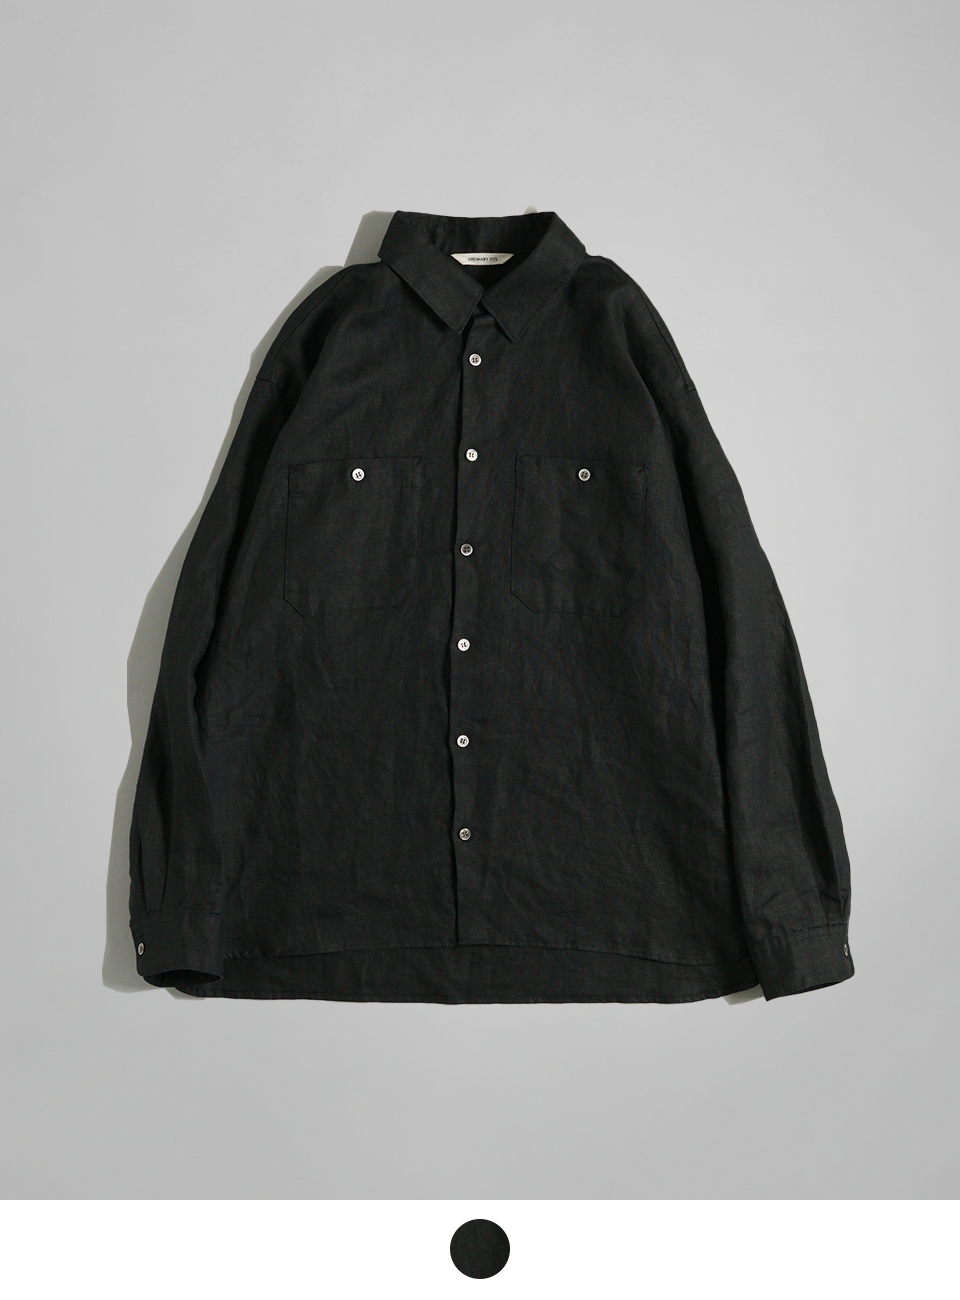 ORDINARY FITS オーディナリーフィッツ リネン ワーク シャツ LINEN WORK SHIRTS OF-S112【送料無料】